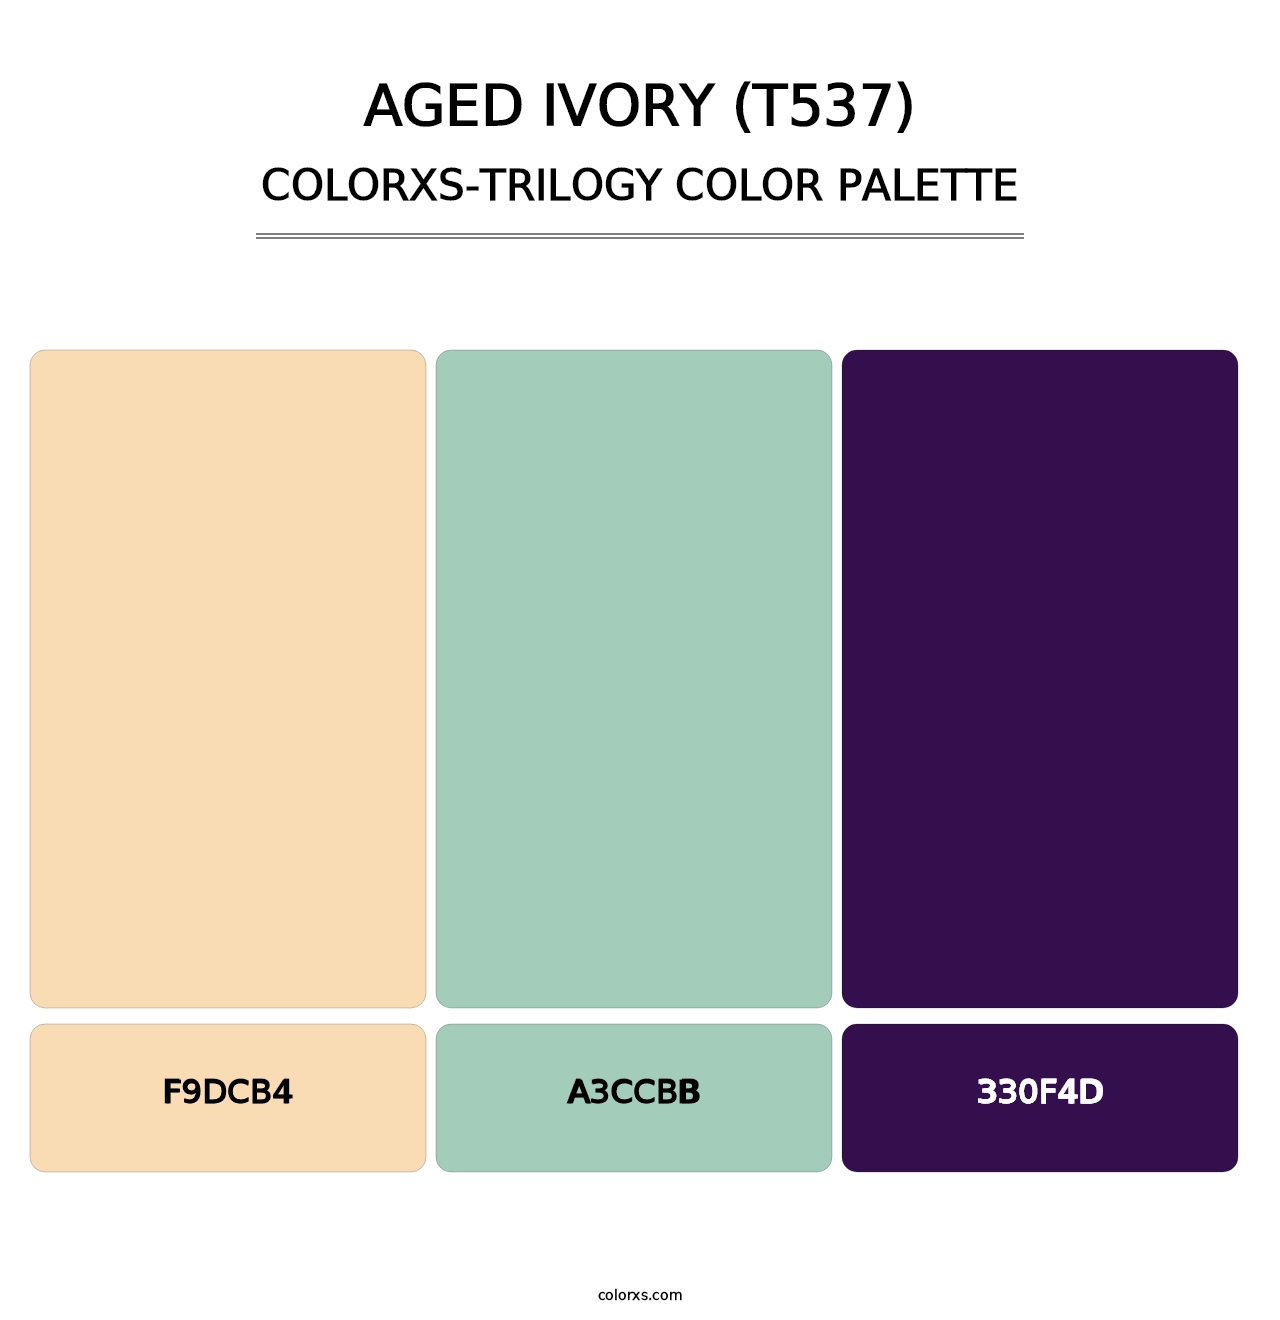 Aged Ivory (T537) - Colorxs Trilogy Palette